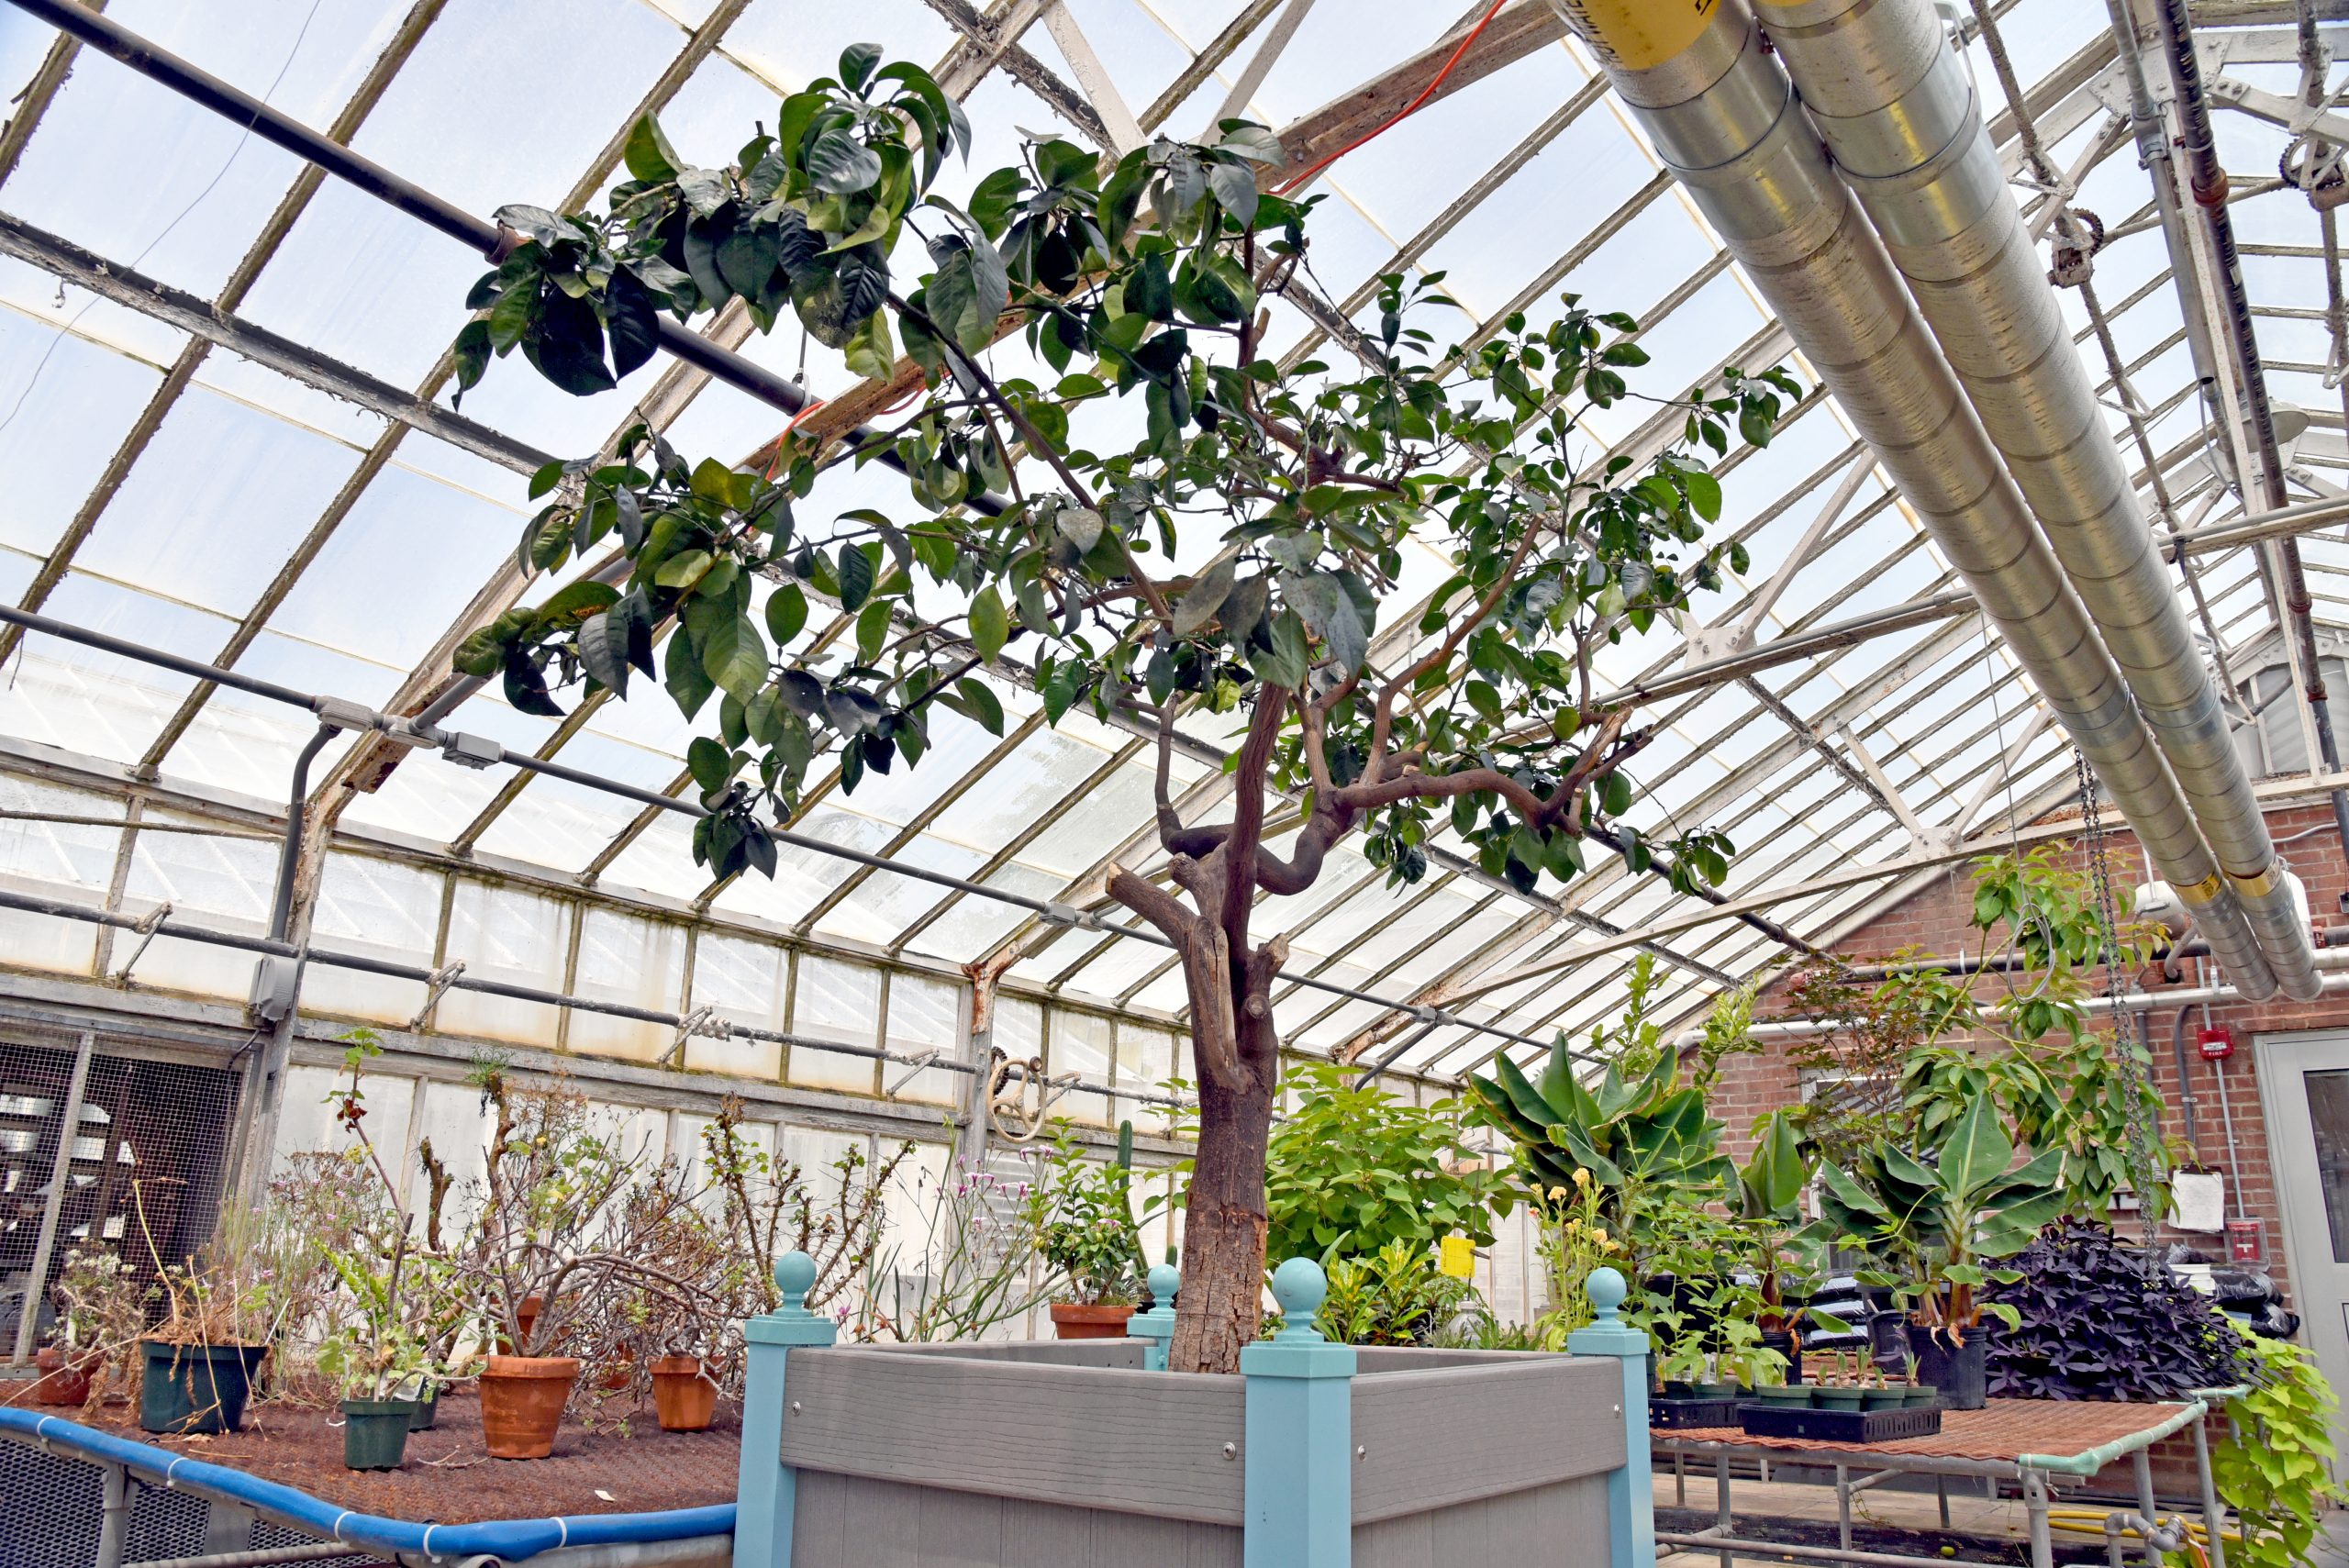 view of an orange tree in a greenhouse